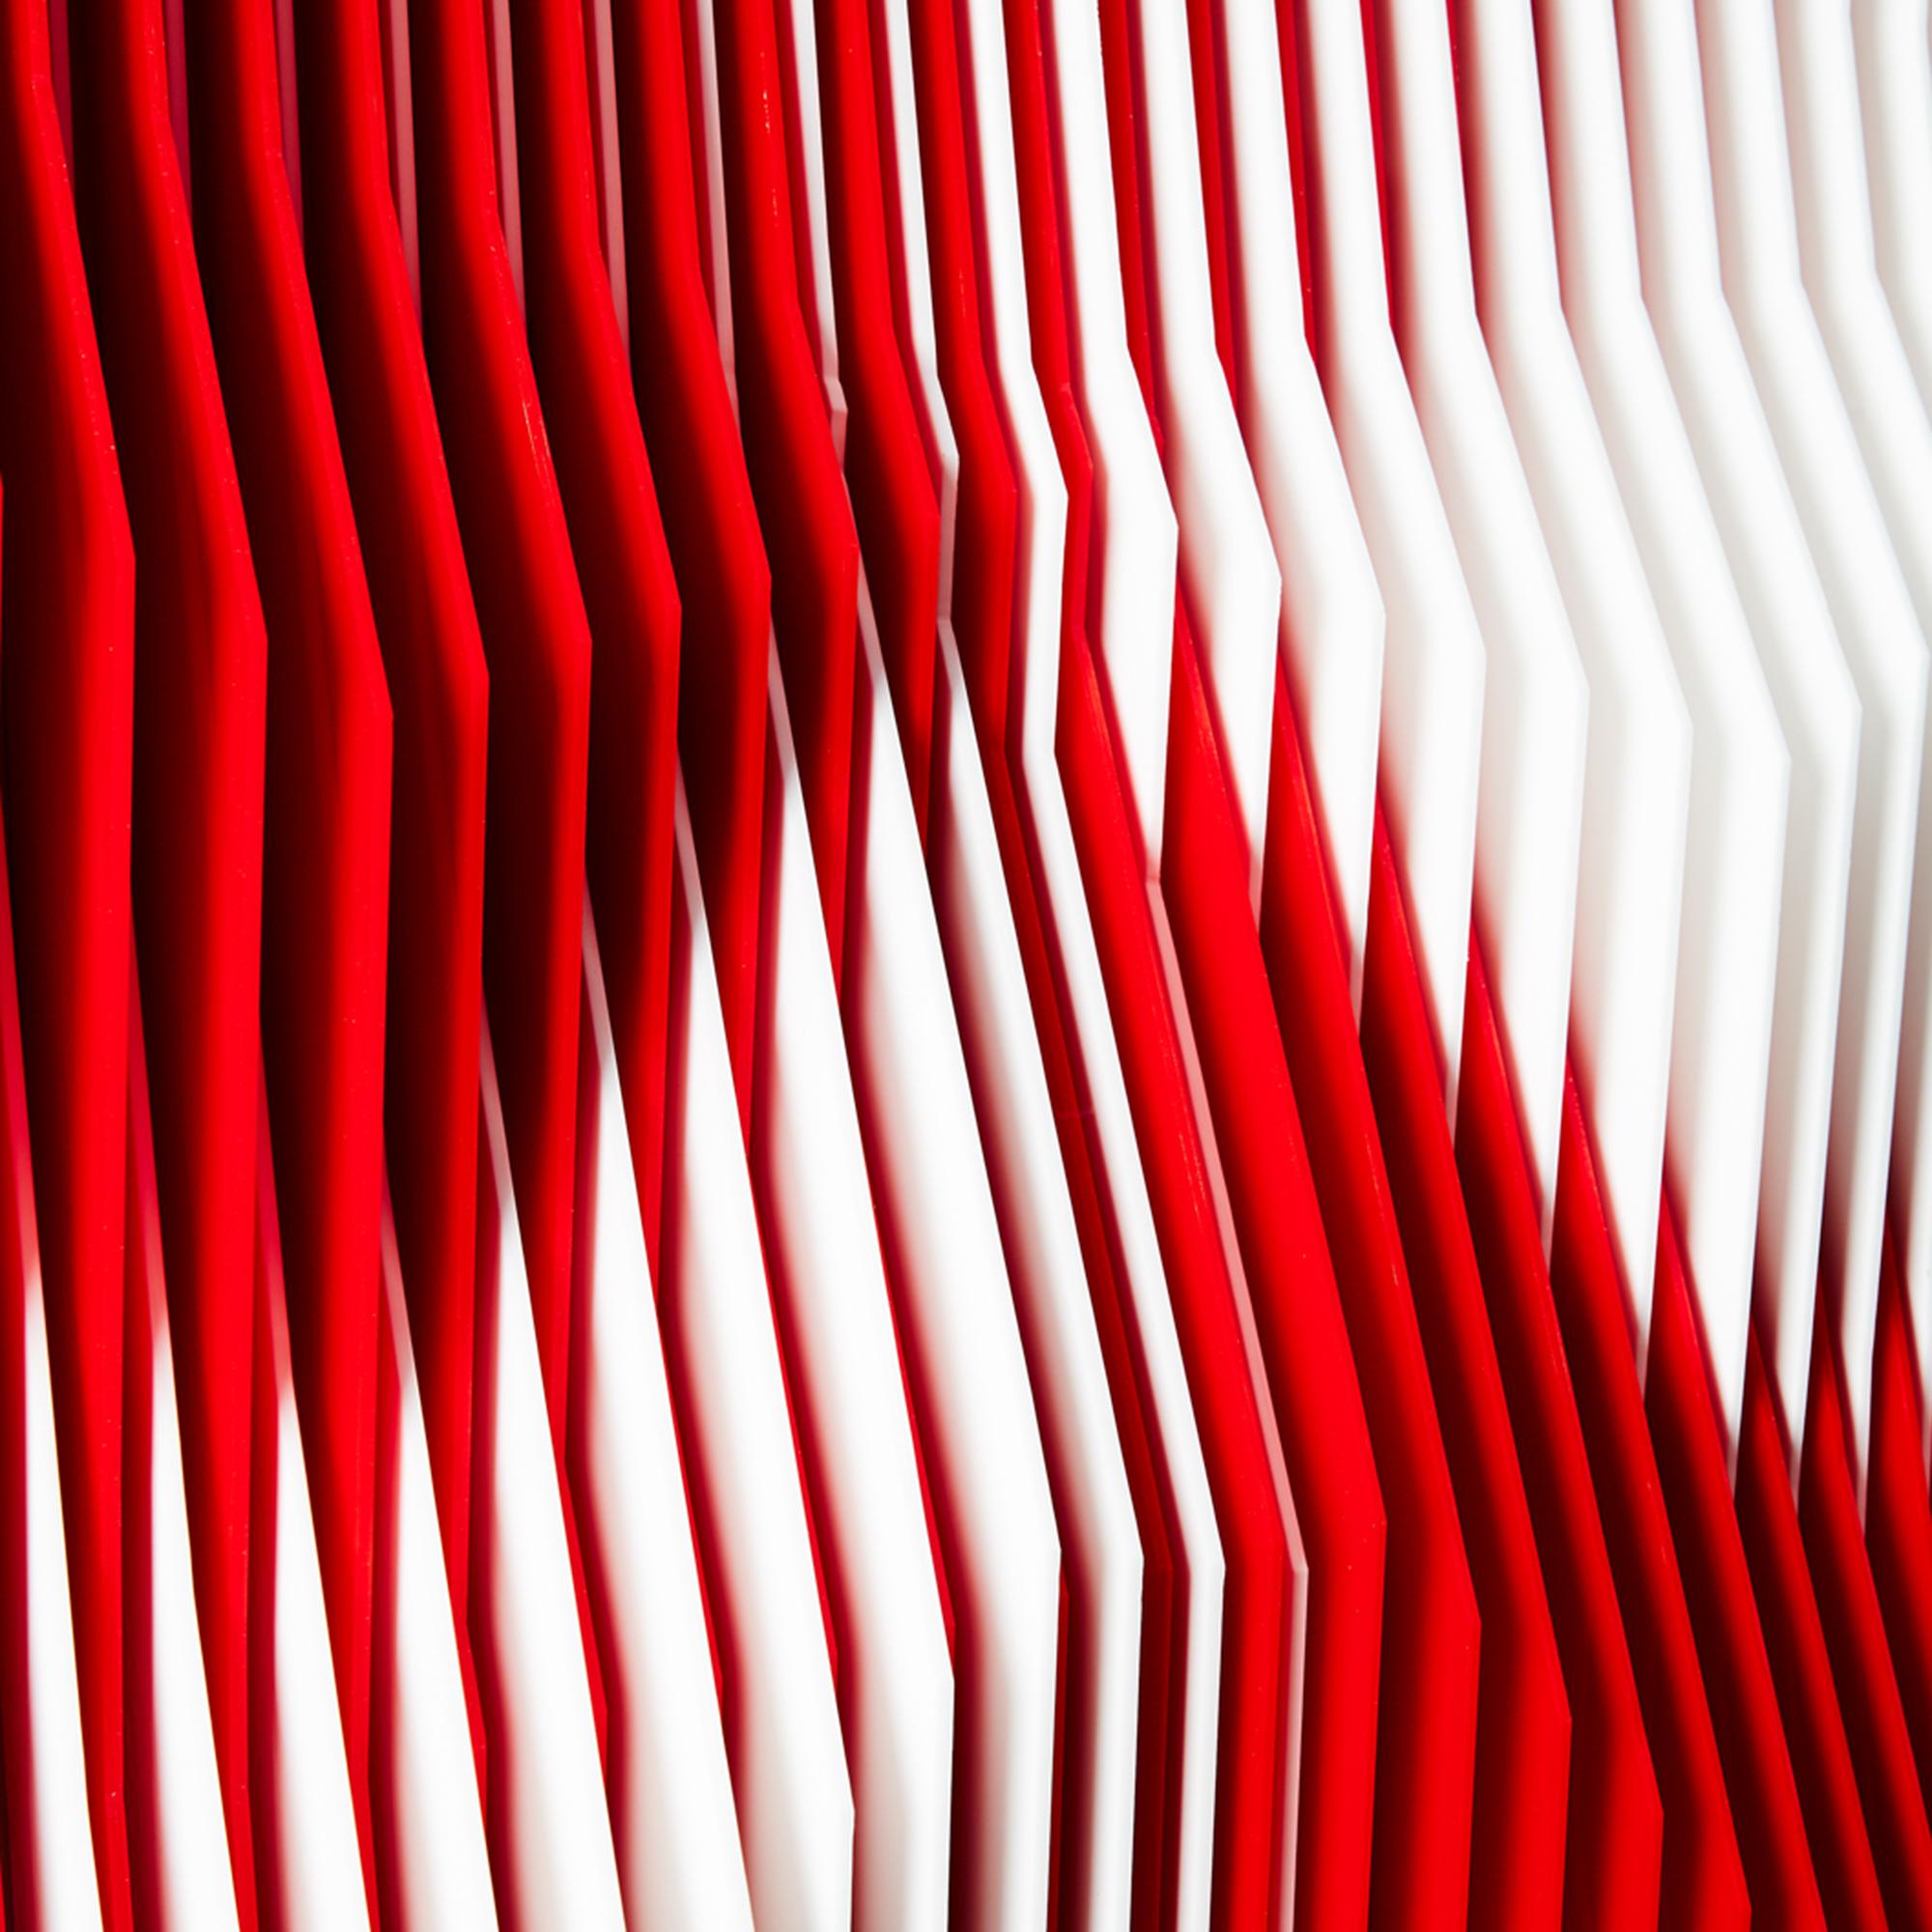 'Juxtapos Red & Grey', Kinetic Wall Art - Sculpture by Jose Margulis